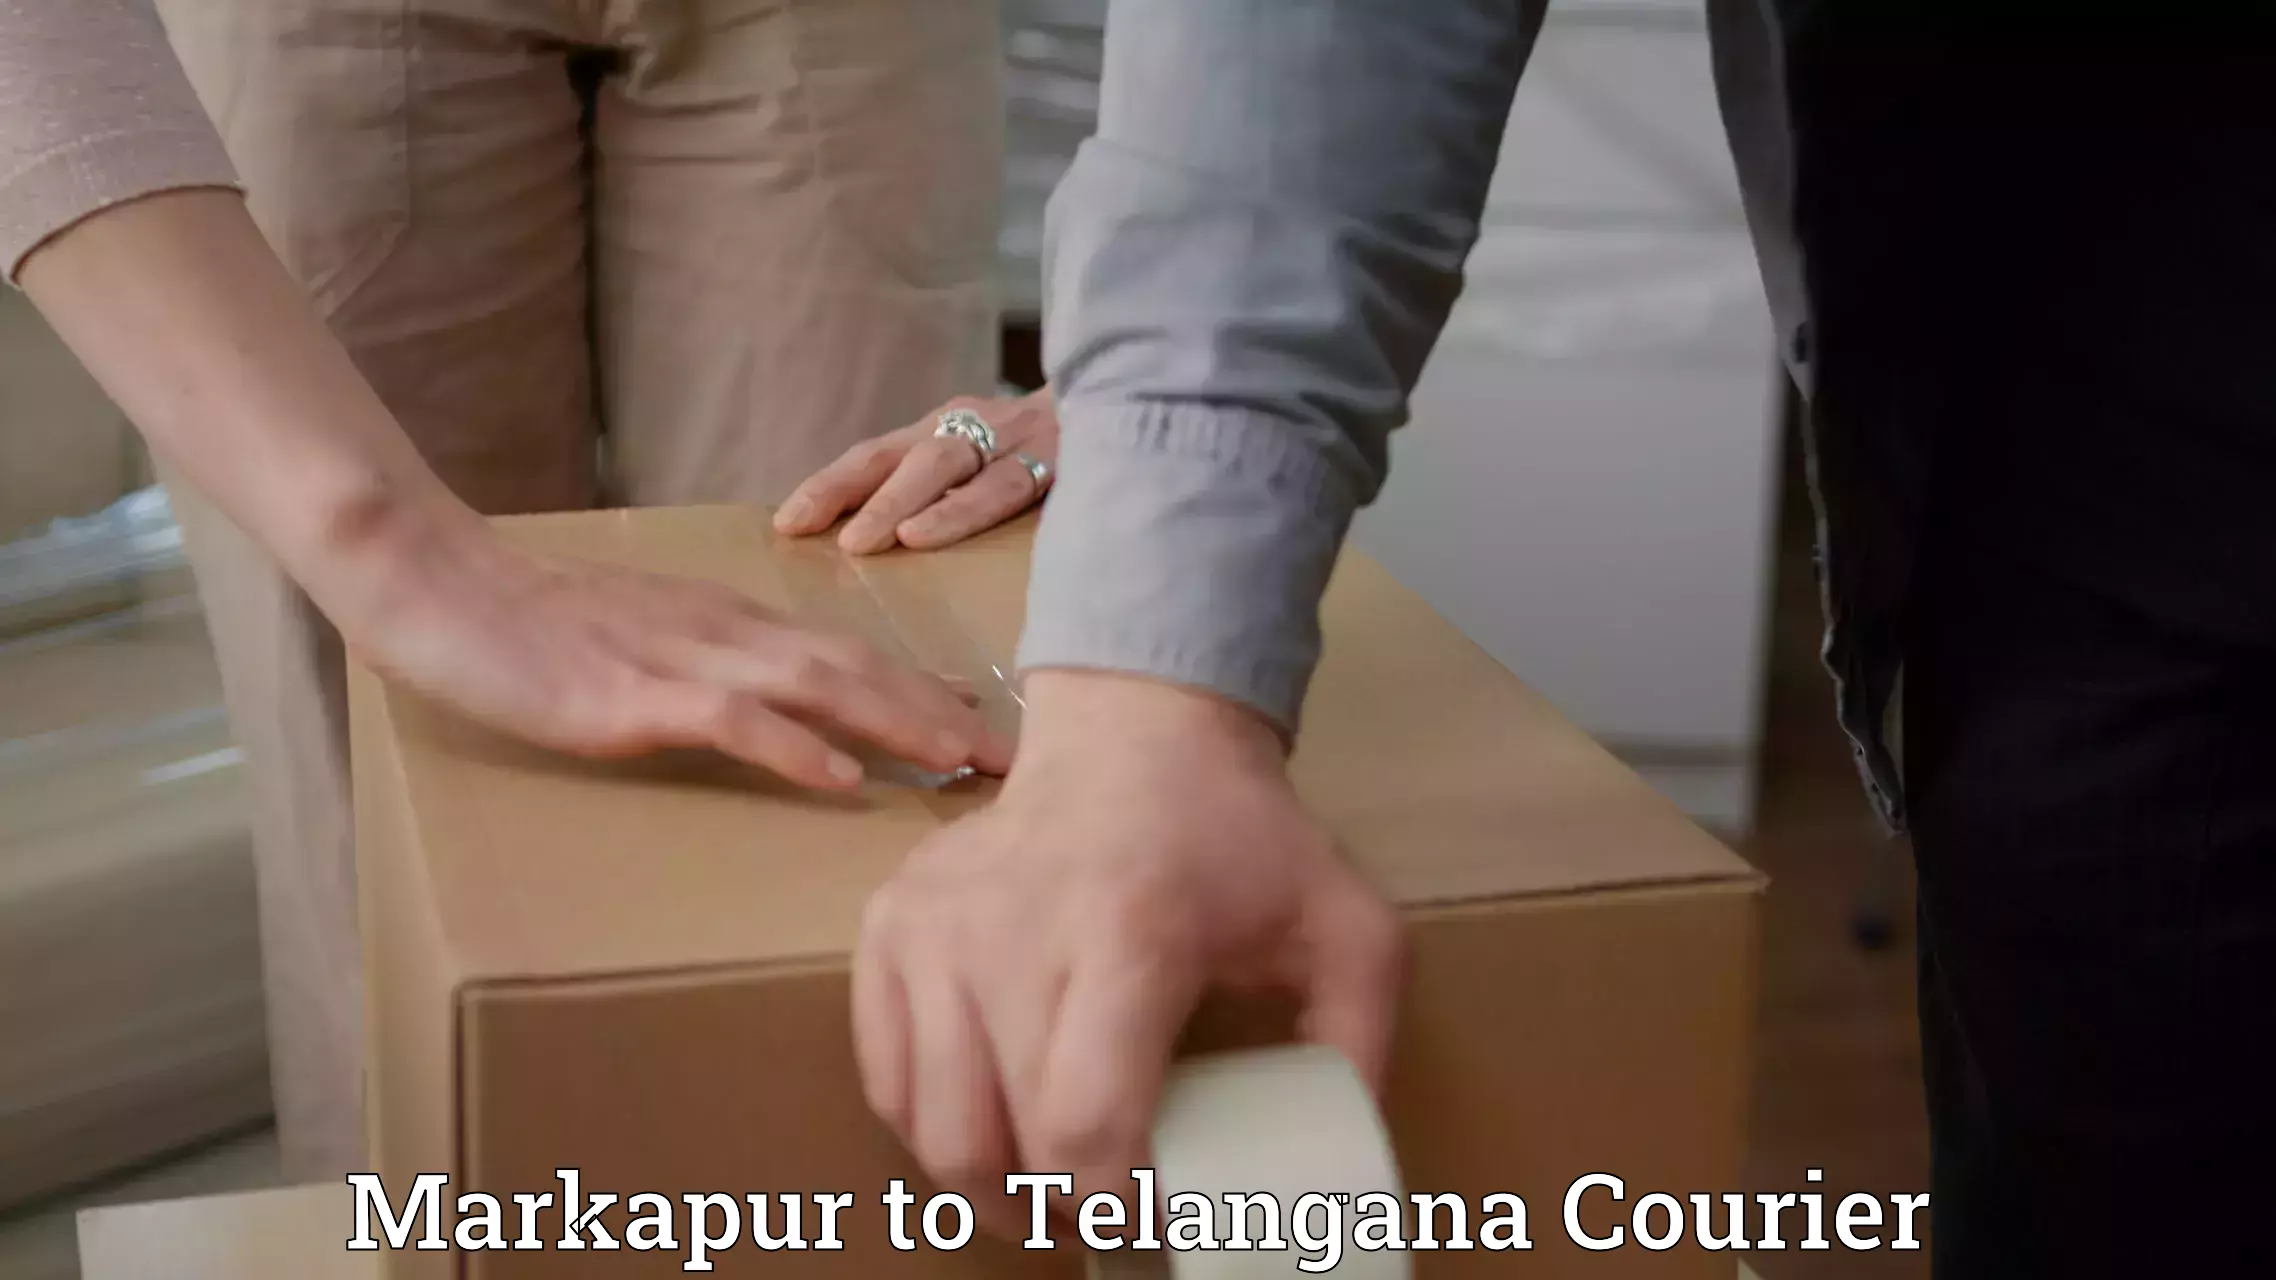 On-call courier service Markapur to Rayaparthi